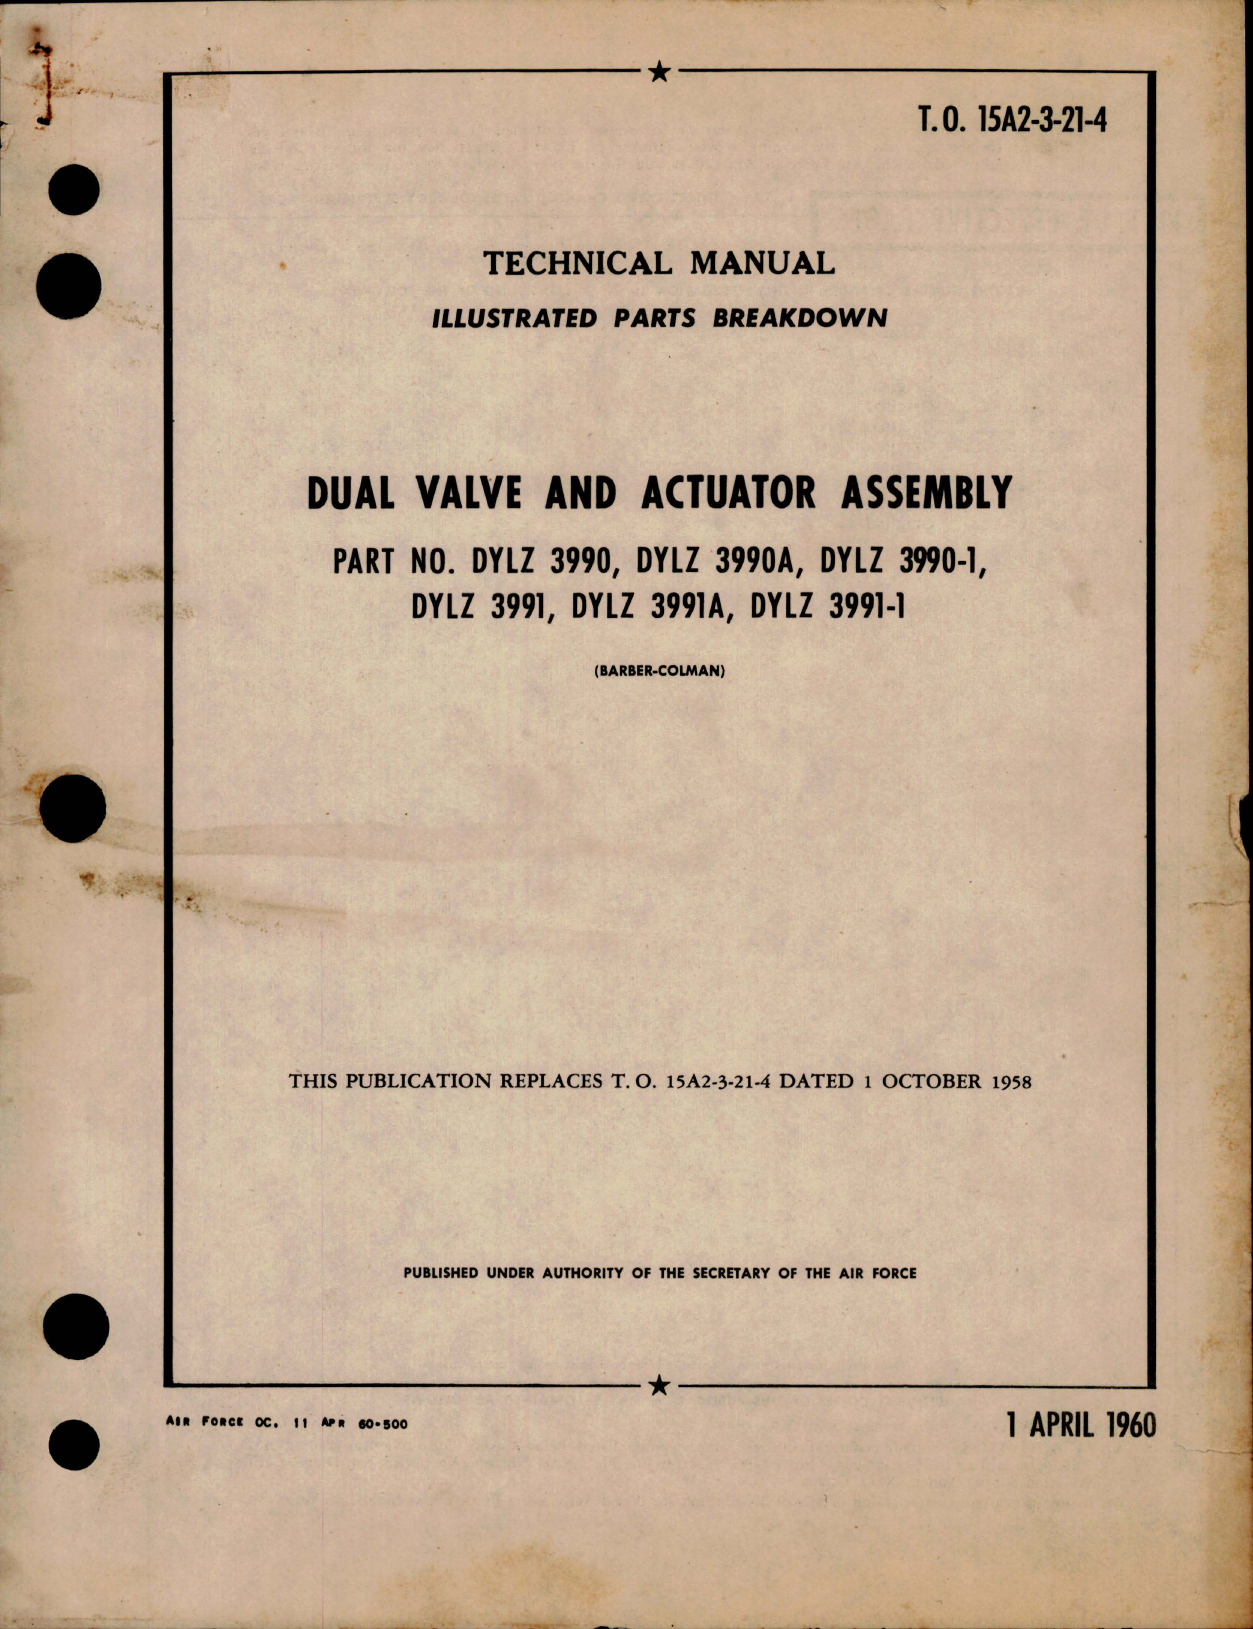 Sample page 1 from AirCorps Library document: Illustrated Parts Breakdown for Dual Valve and Actuator Assembly 